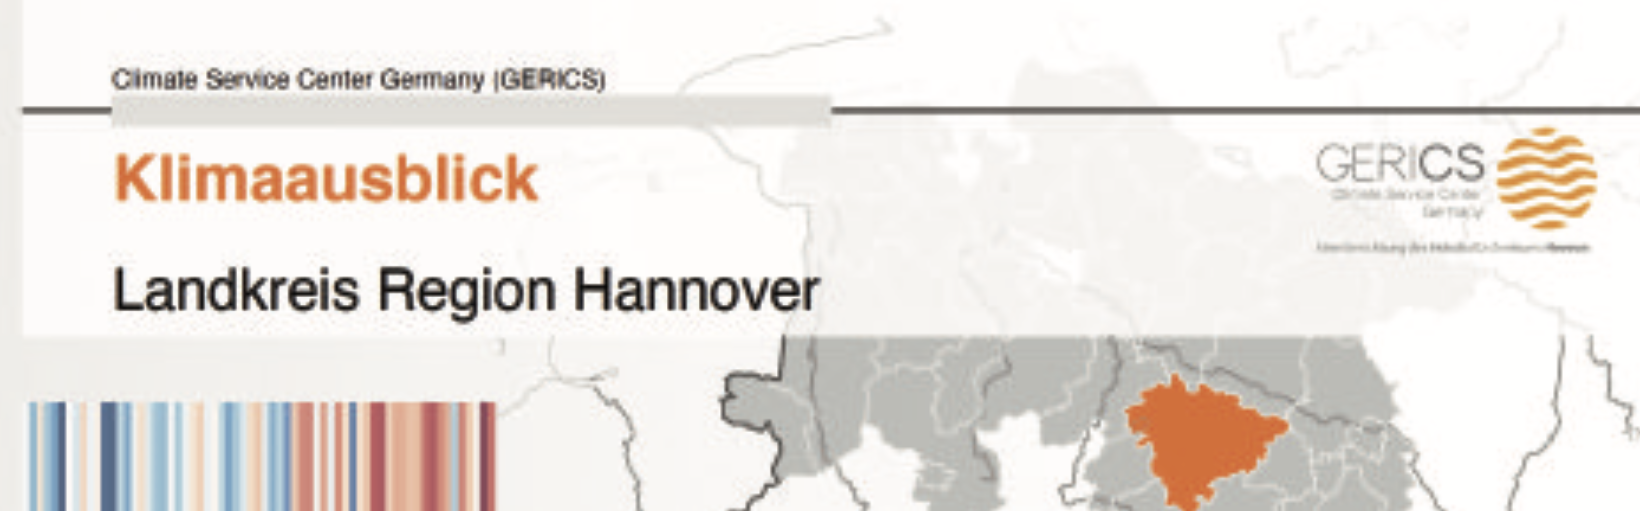 Figure 1: Detail from the title page of a Climate Outlook (here for the German county “Region Hannover”)